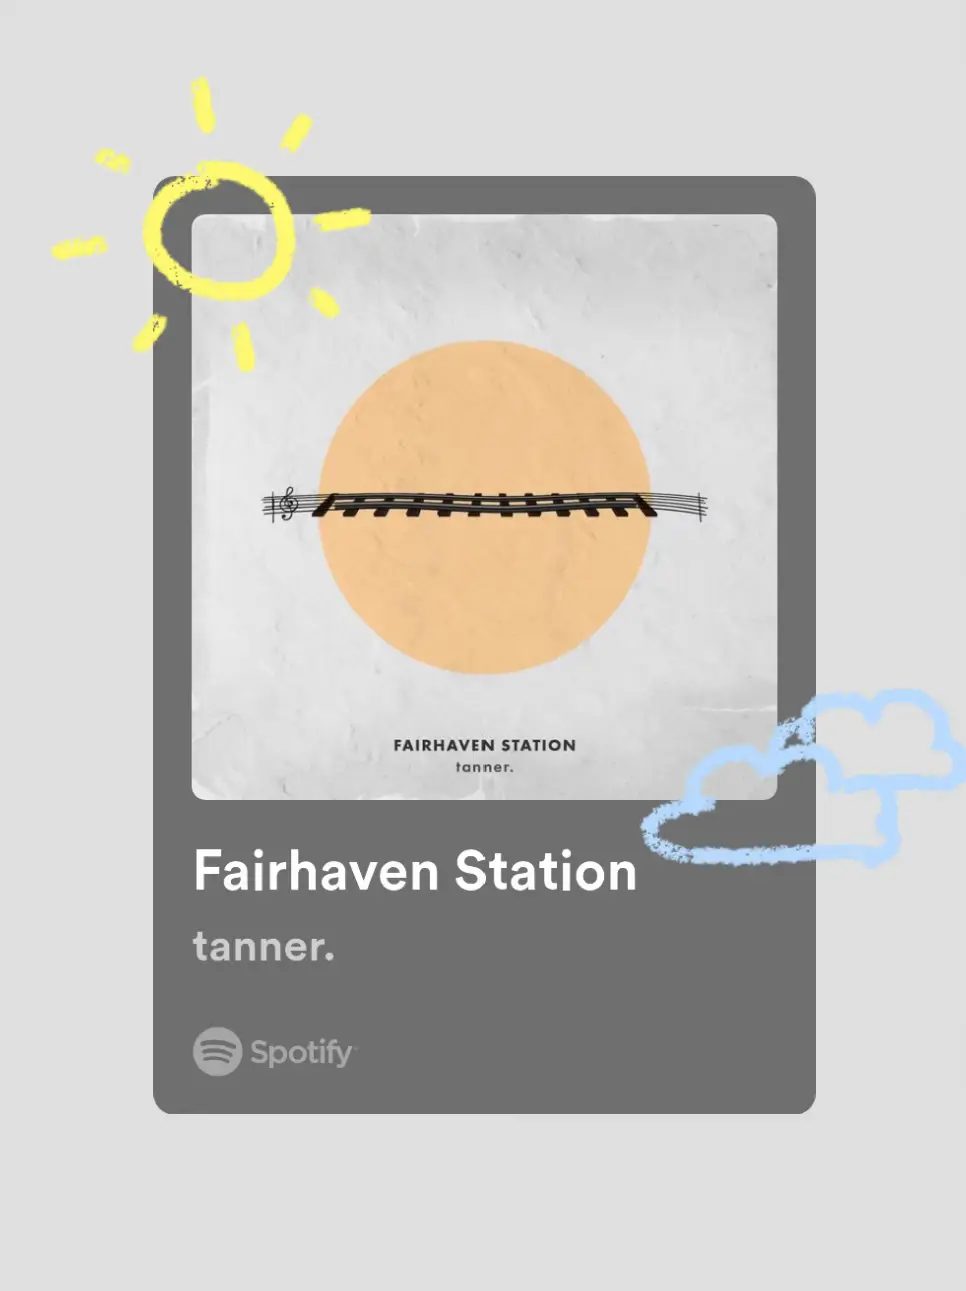  A picture of a sun with the words "Fairhaven Station" written underneath it.